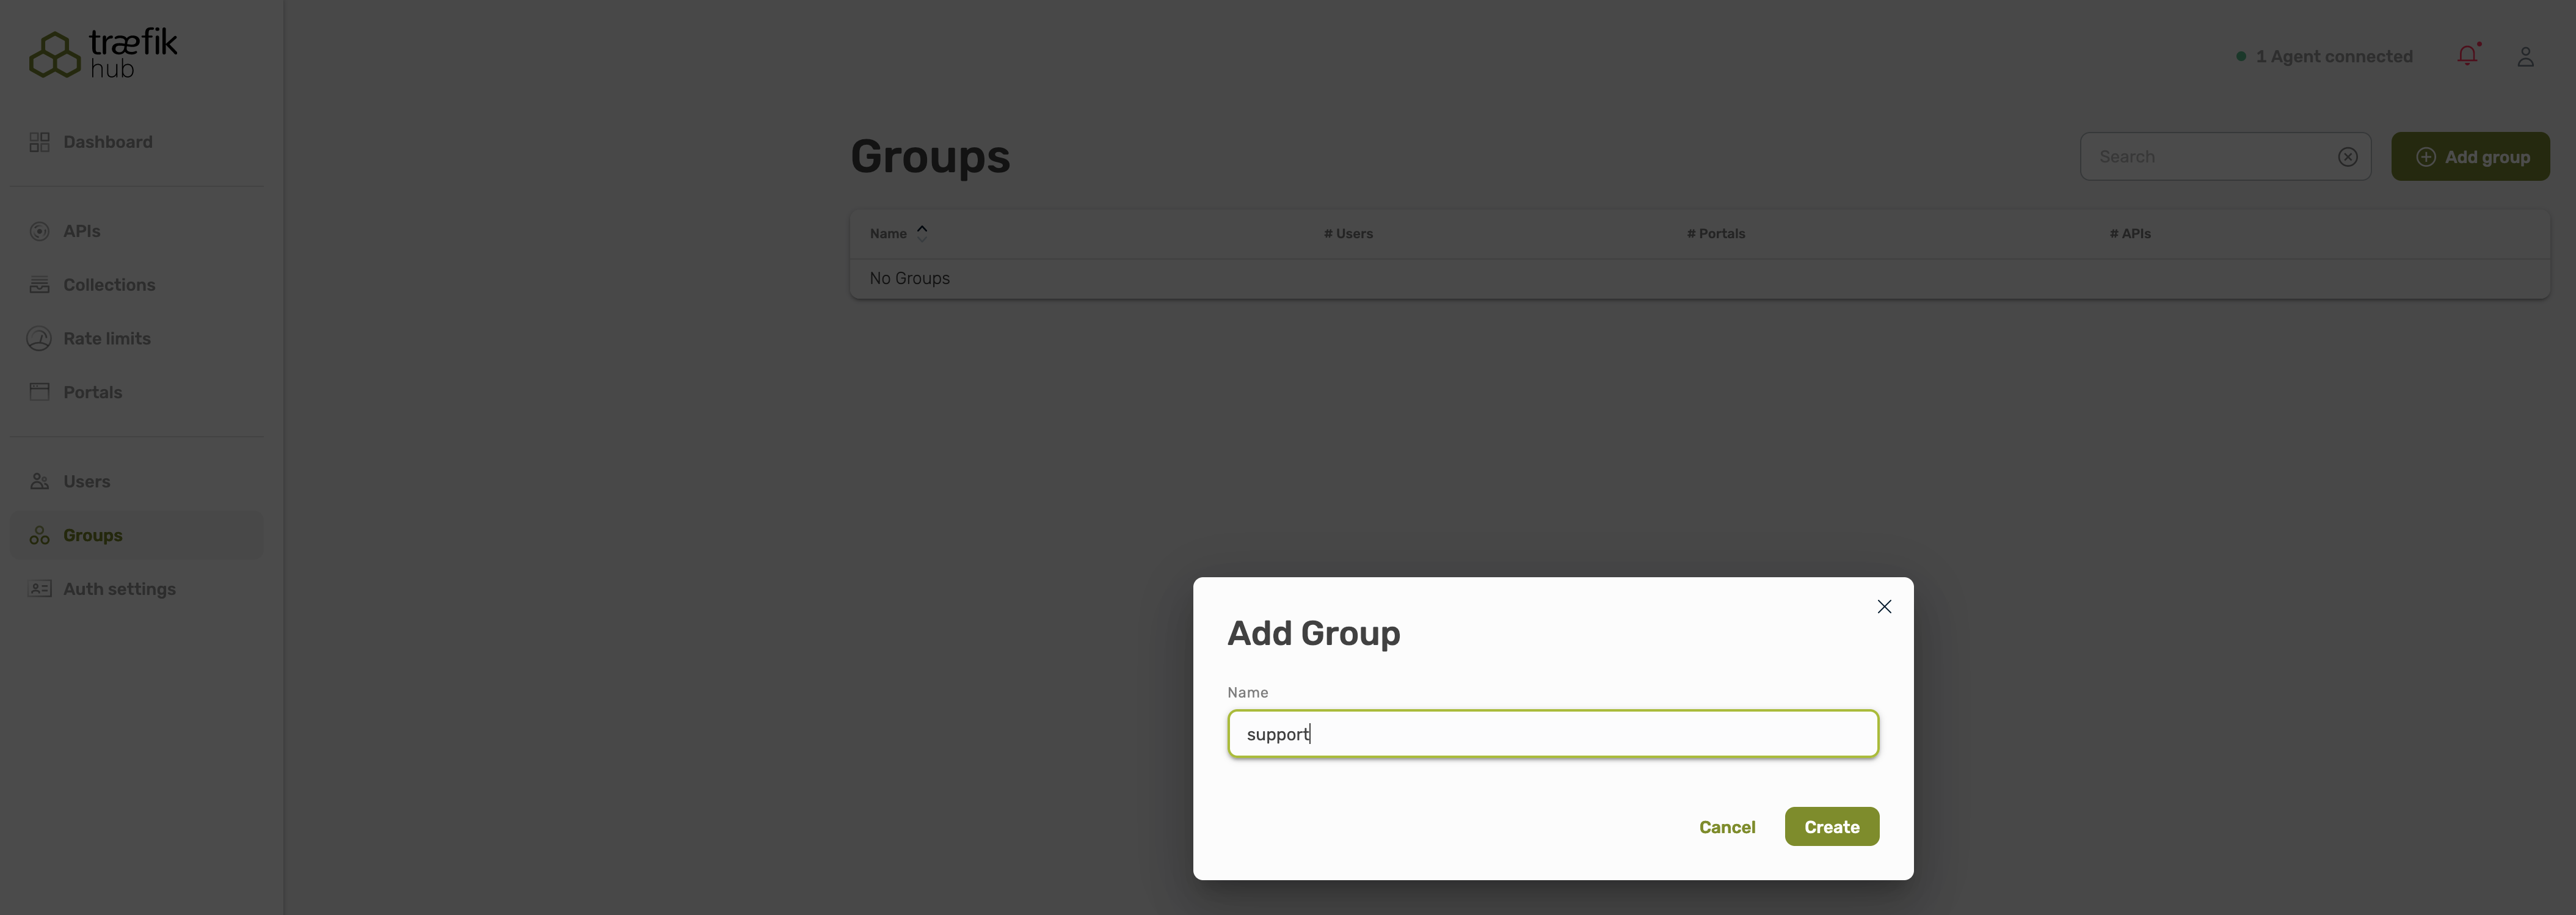 Form for adding a group.